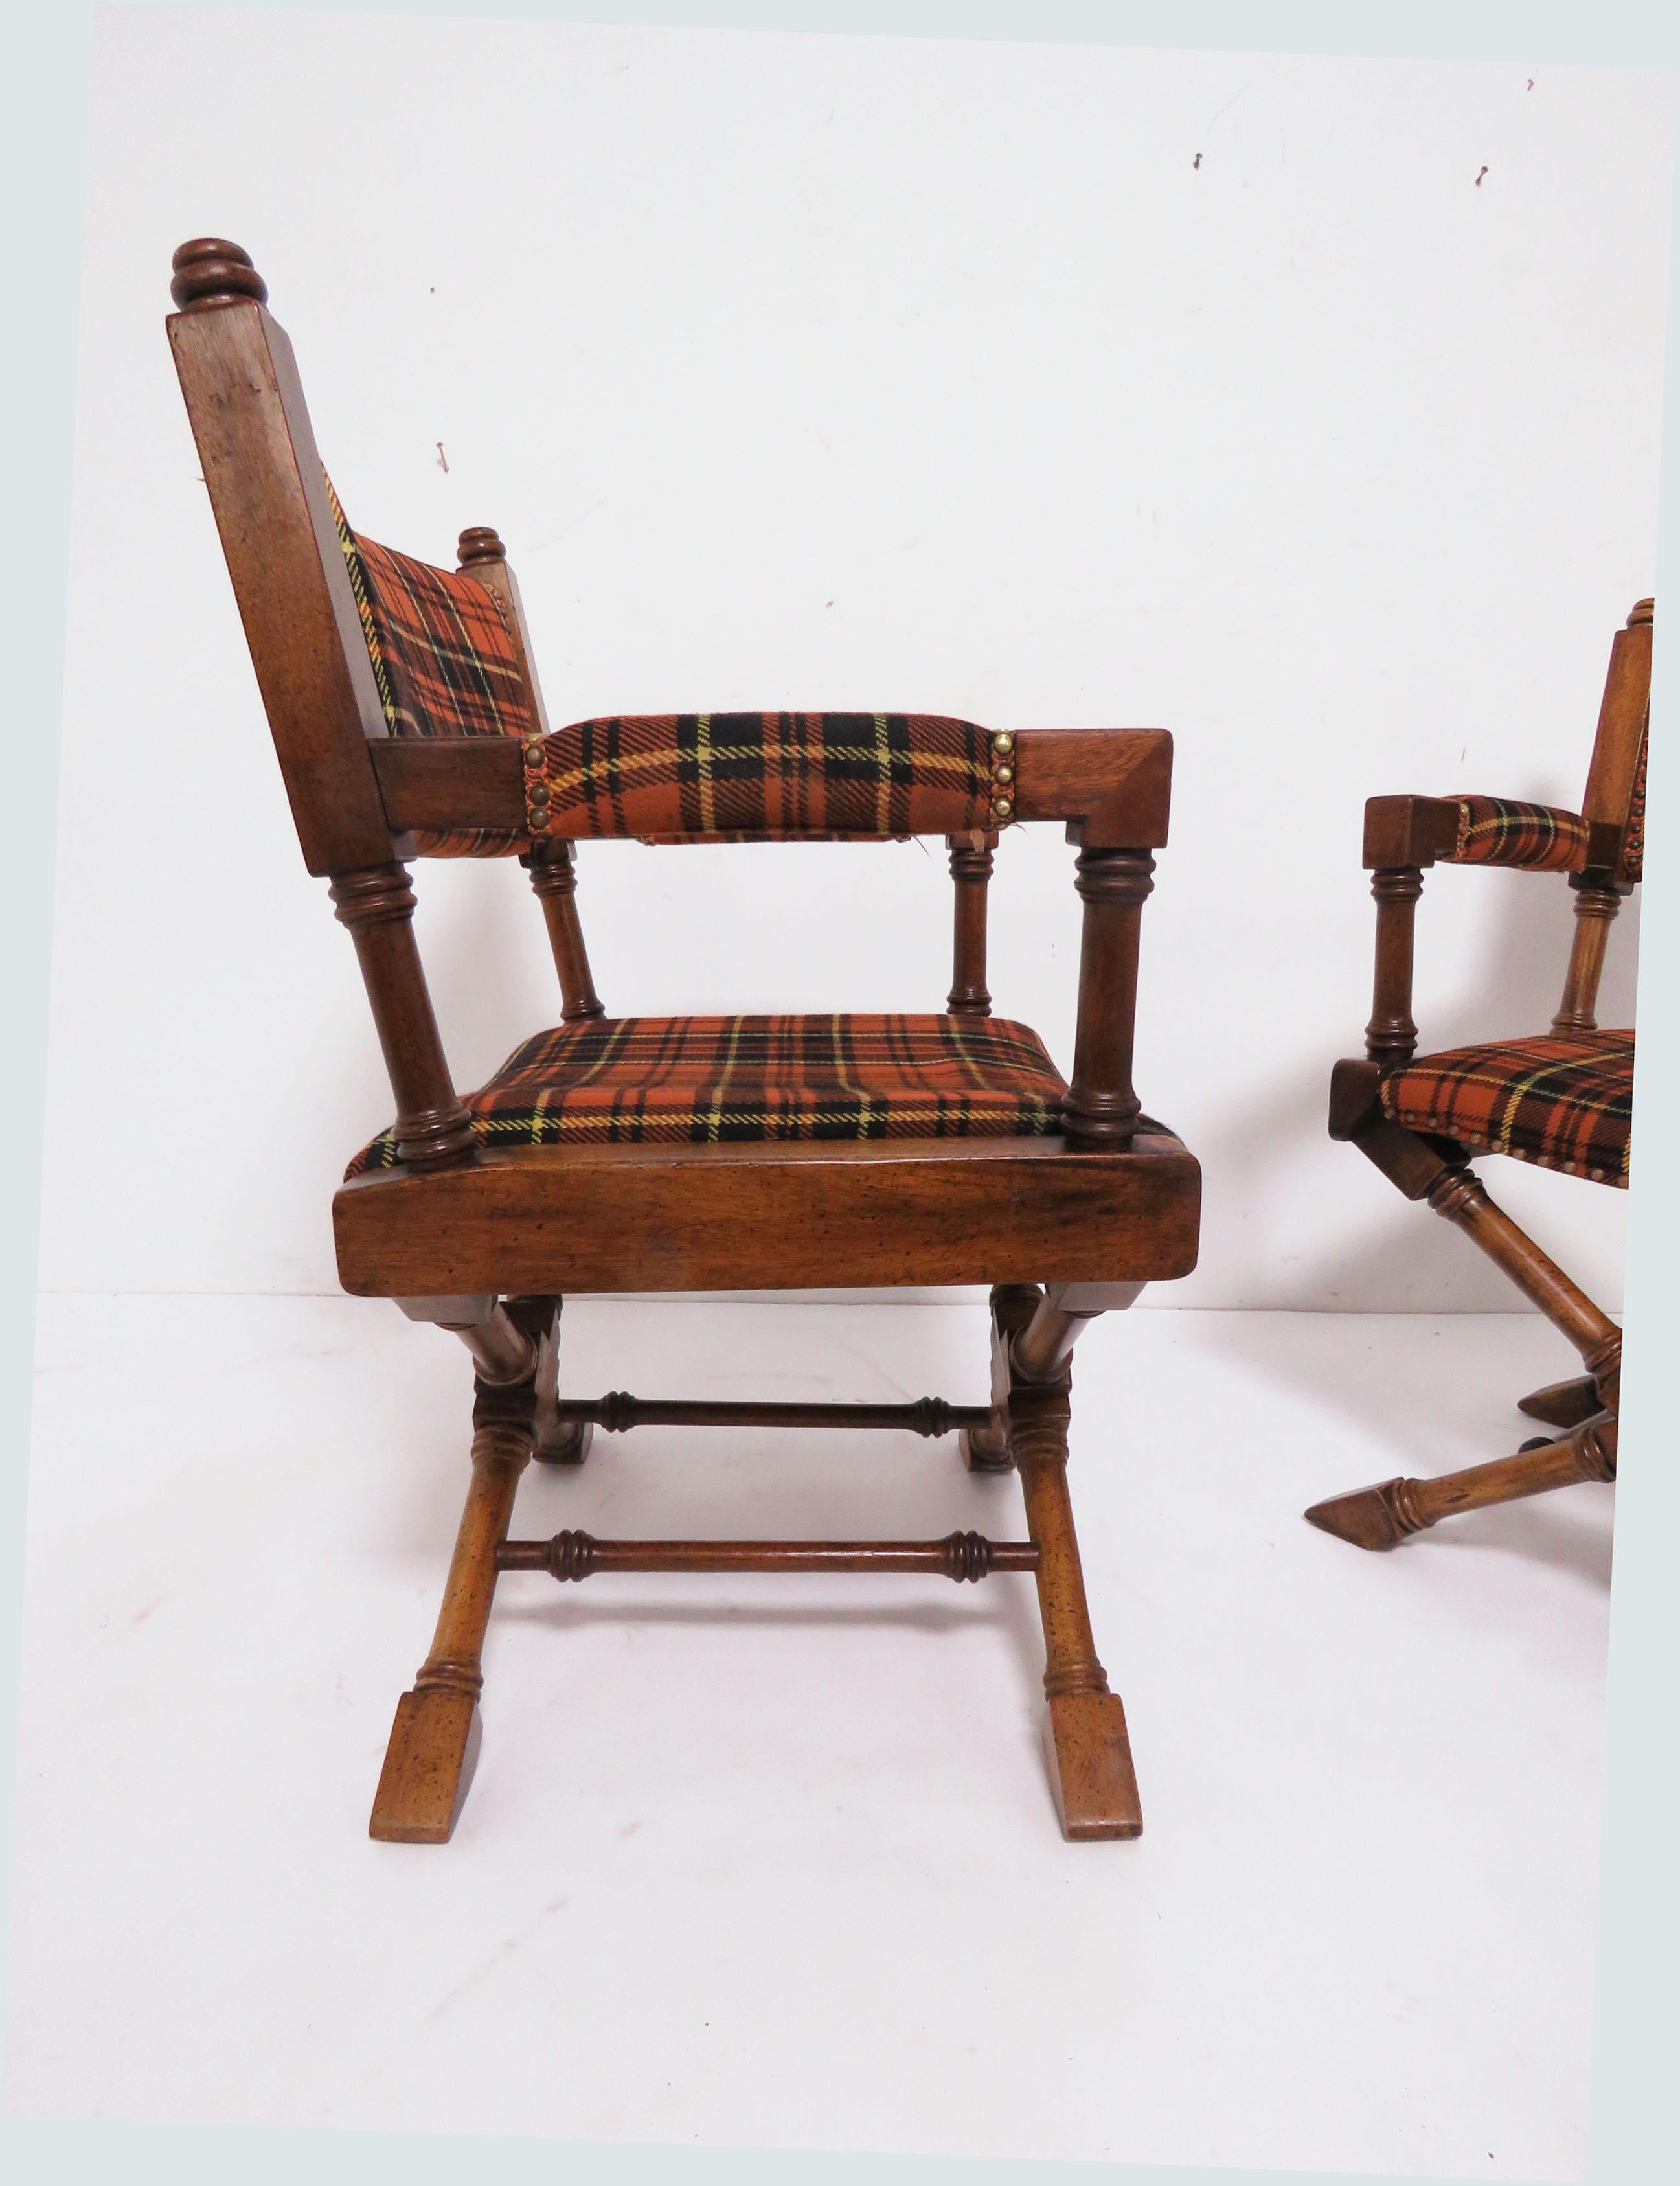 Upholstery Pair of Hollywood Regency Style X-Base Campaign Chairs, circa 1960s